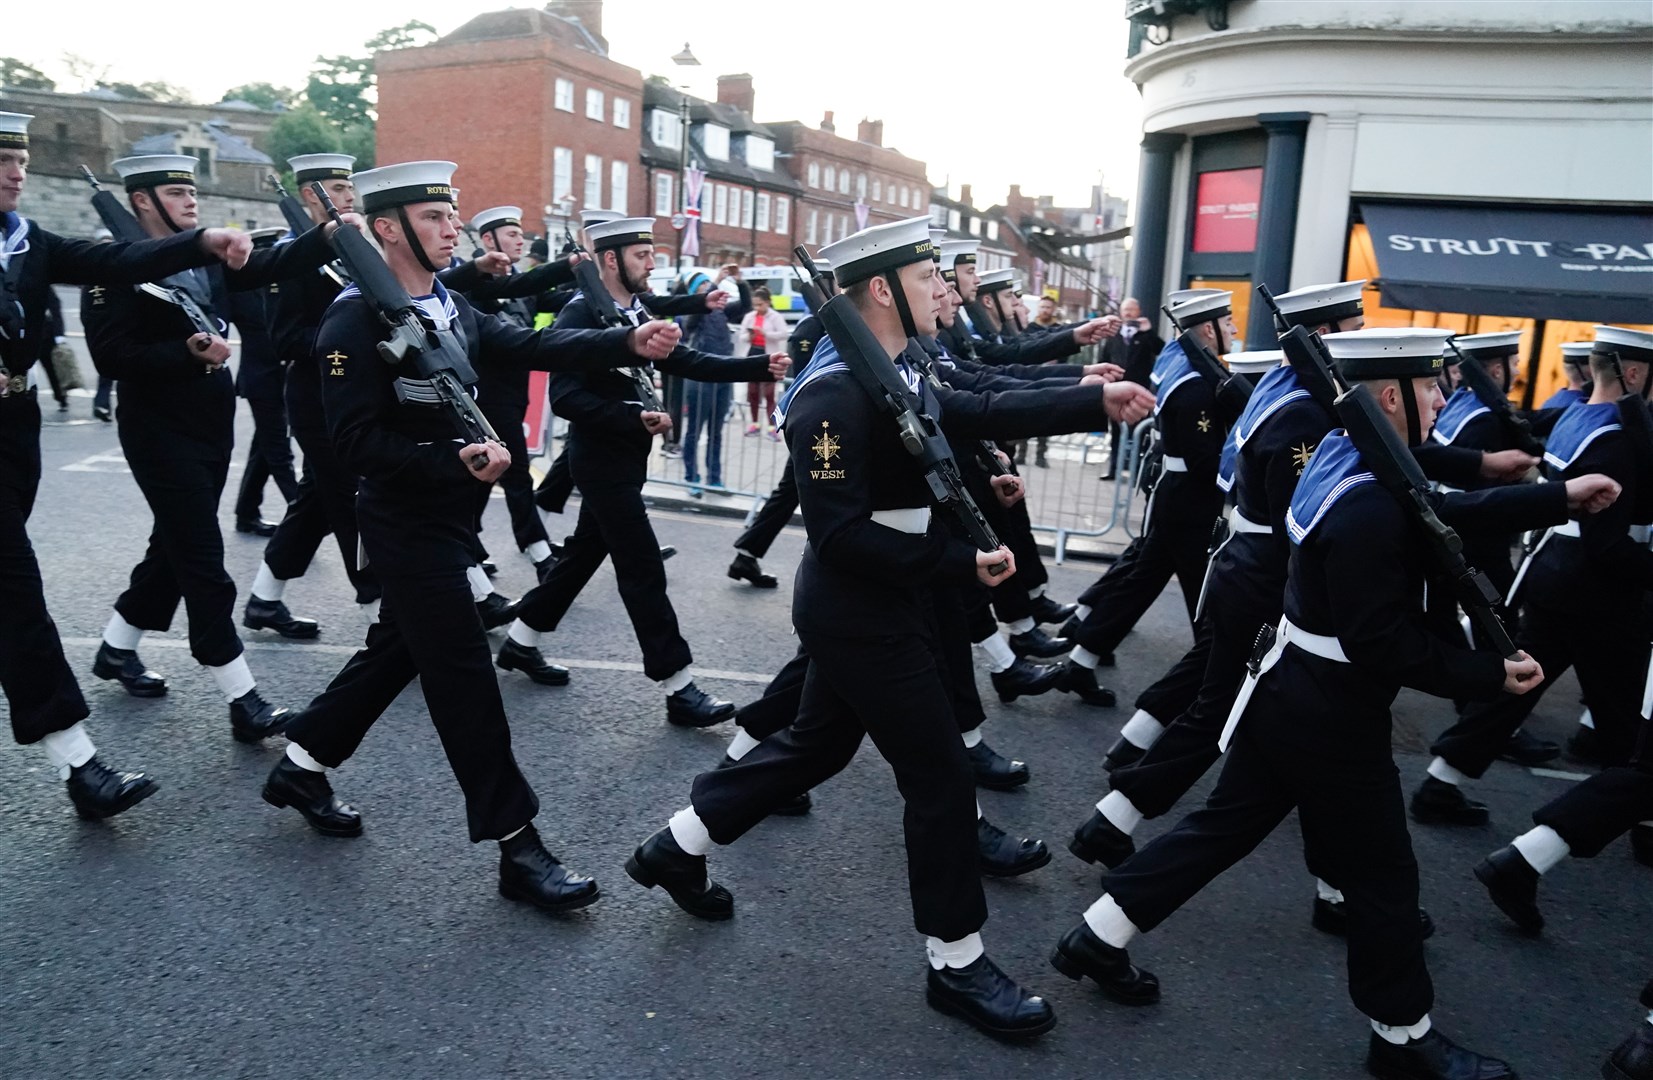 Members of the Royal Navy marched towards Victoria barracks (Andrew Matthews/PA)